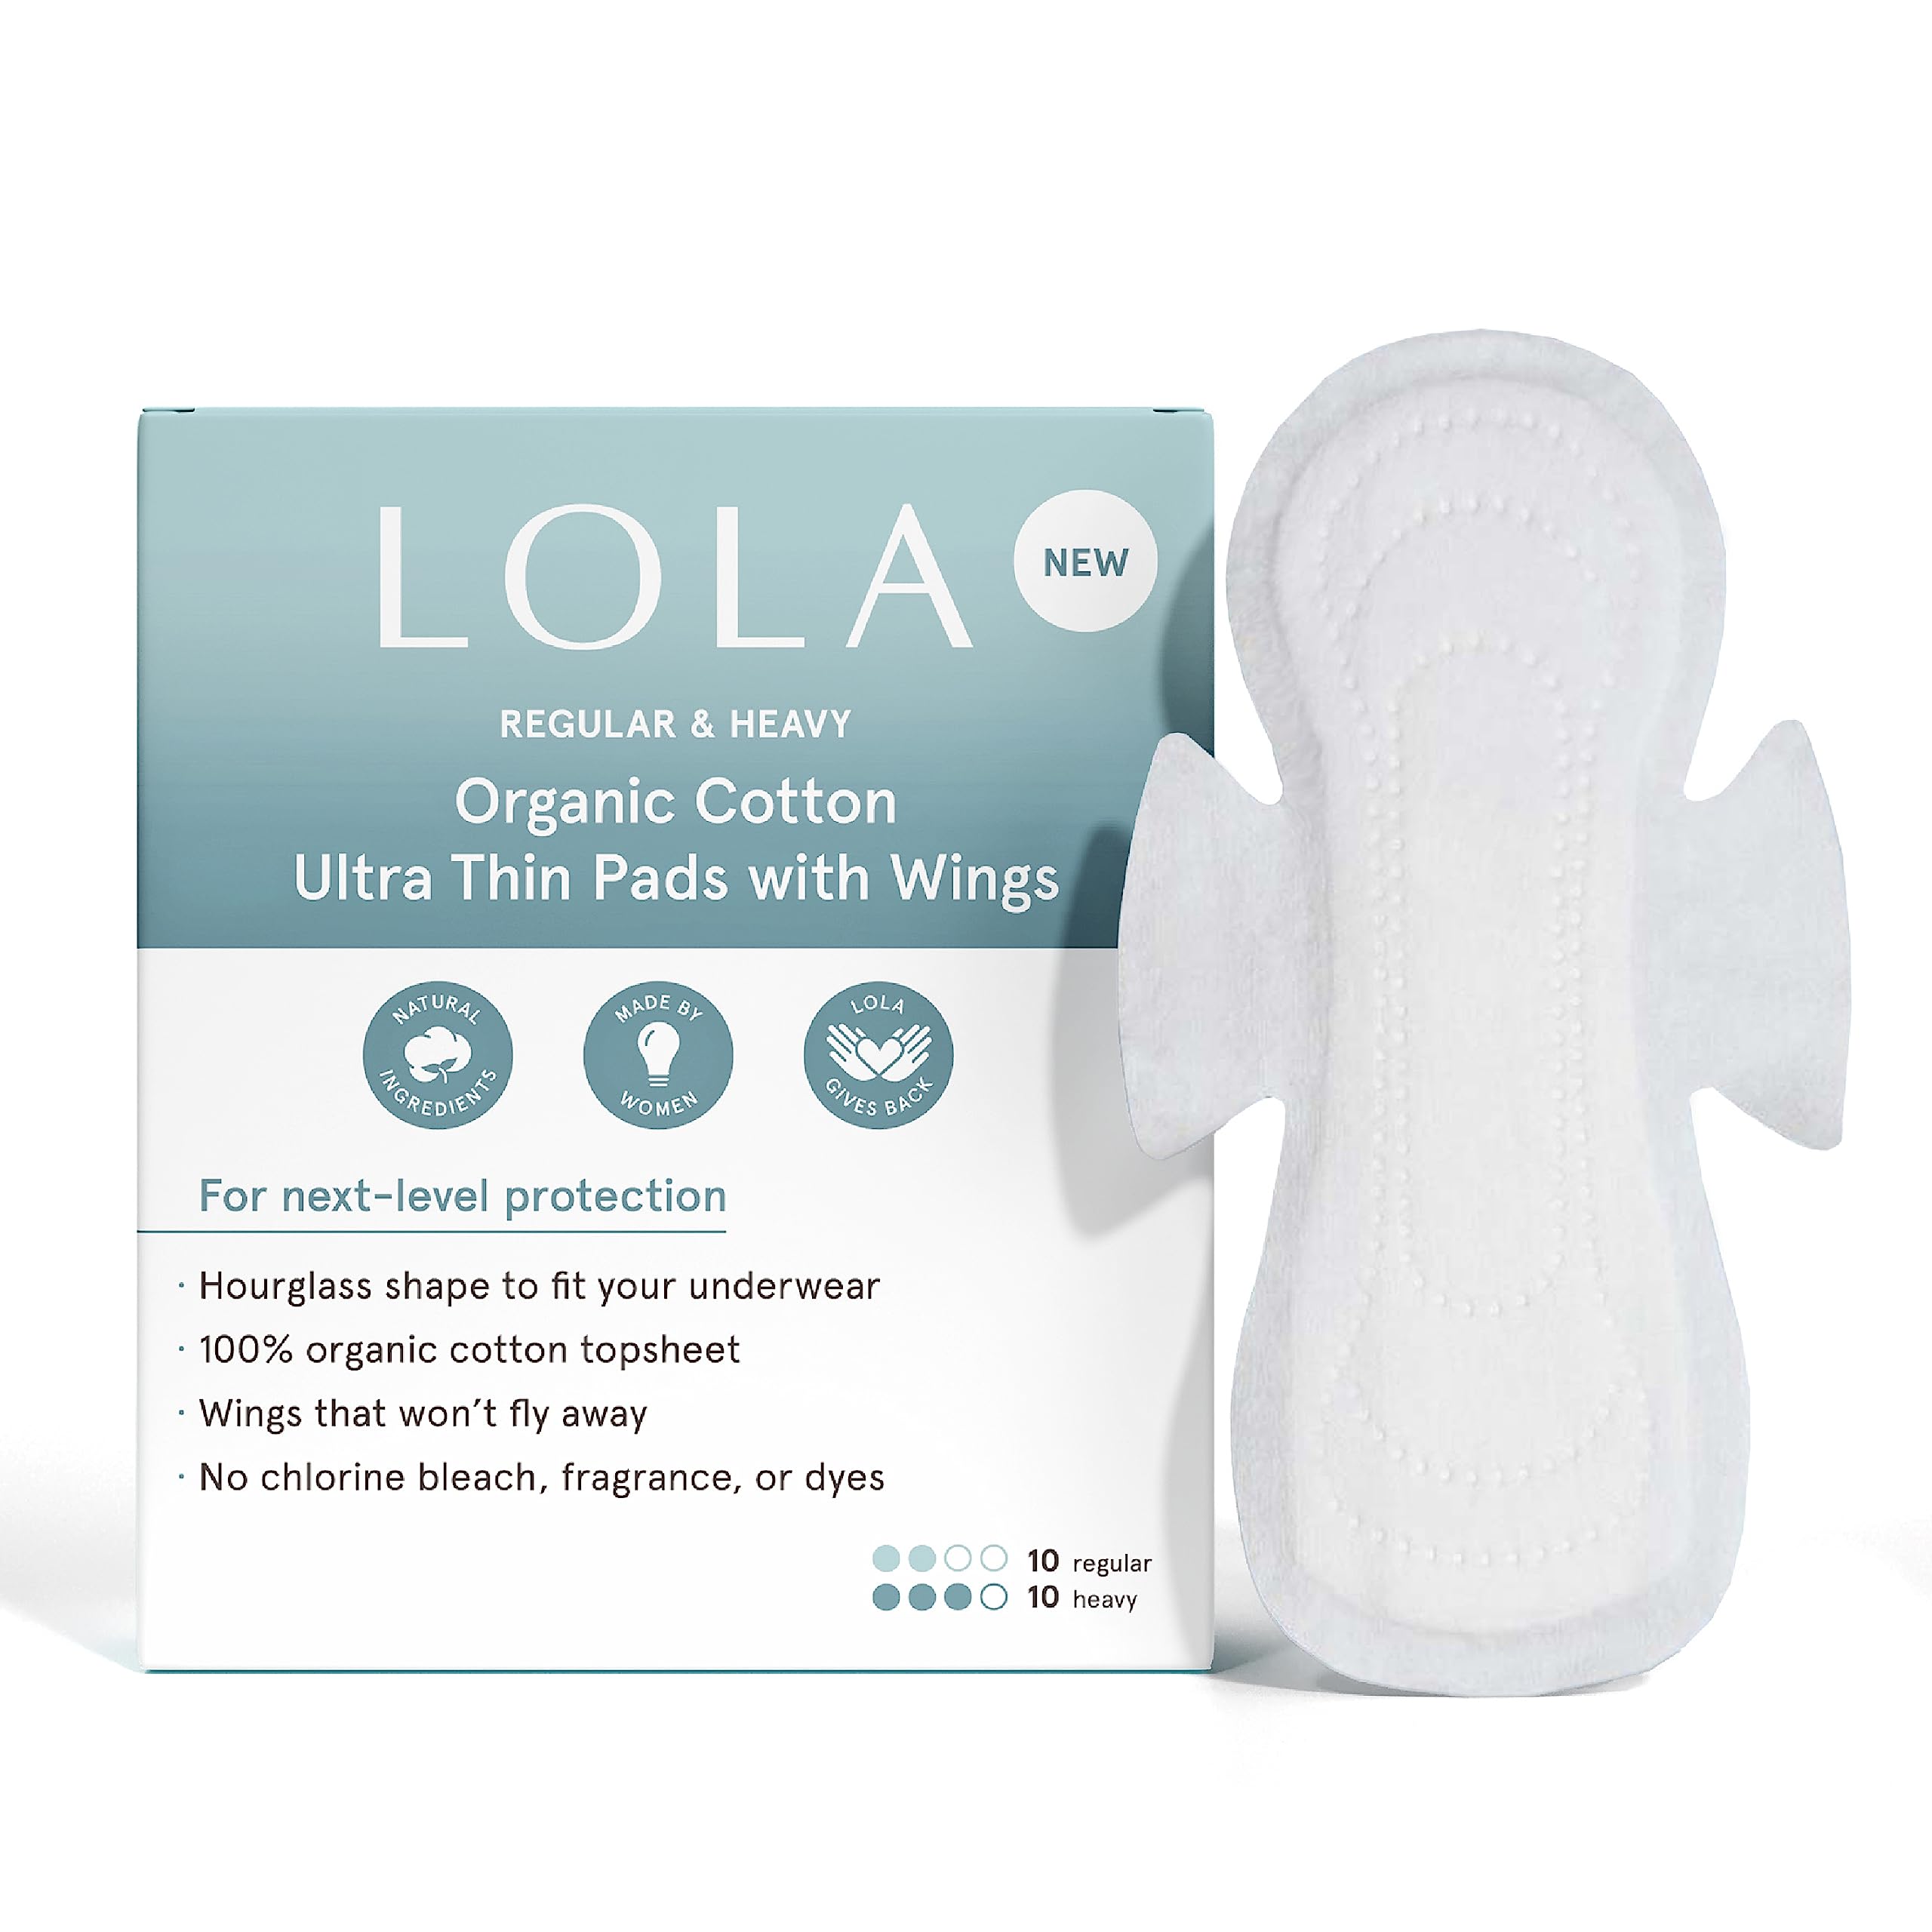 LOLA Organic Cotton Pads 60 Count - Ultra Thin Pad with Wings